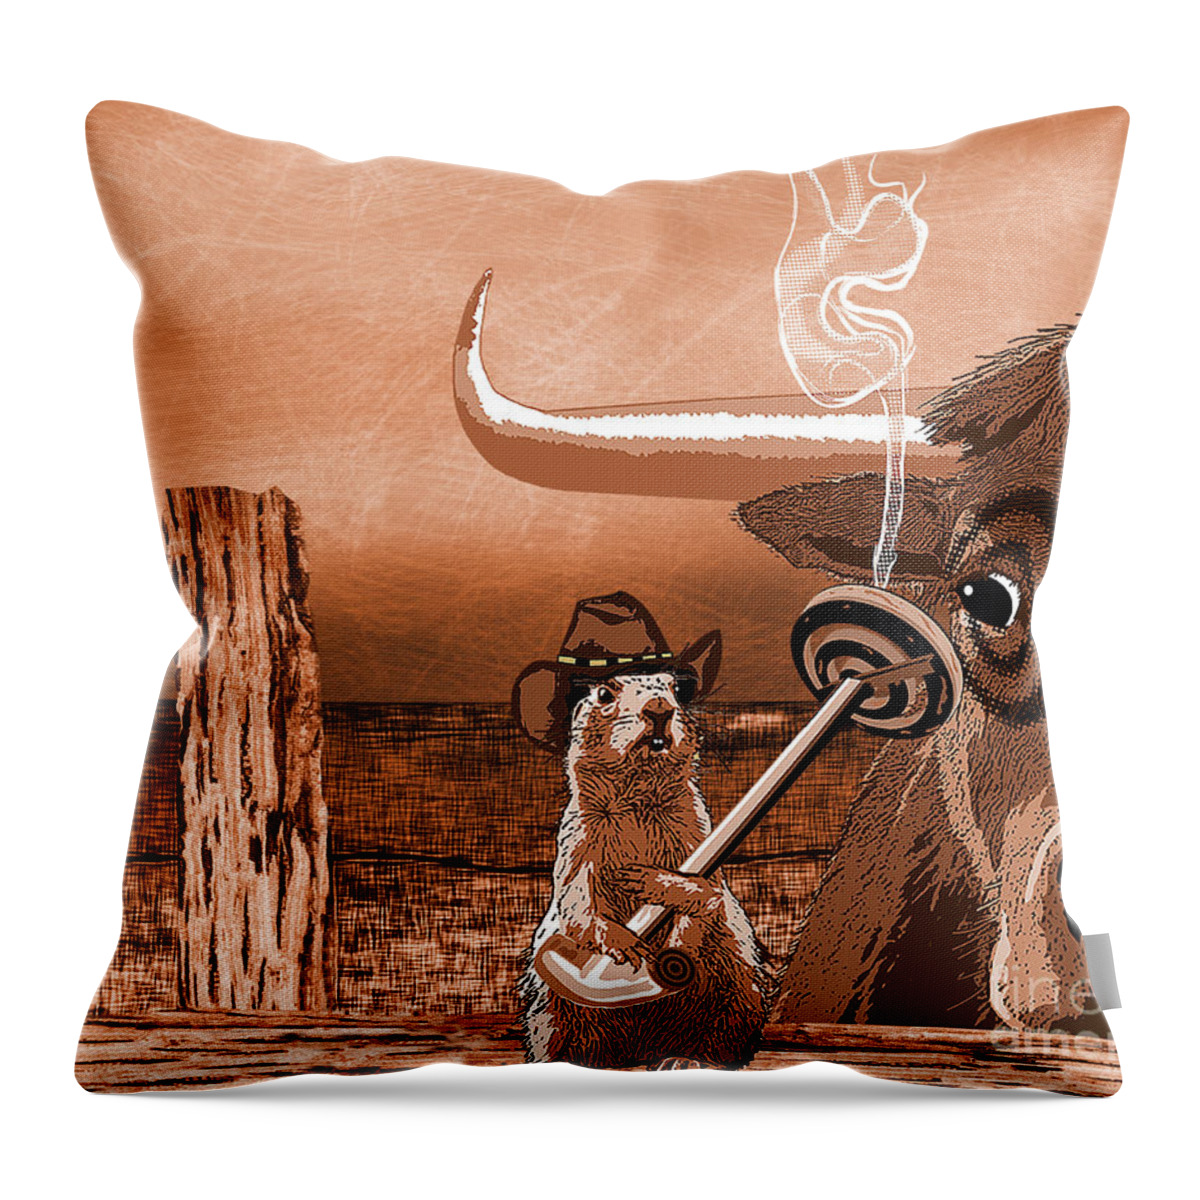 Bull's Eye Throw Pillow featuring the digital art Bull's Eye by Laura Brightwood